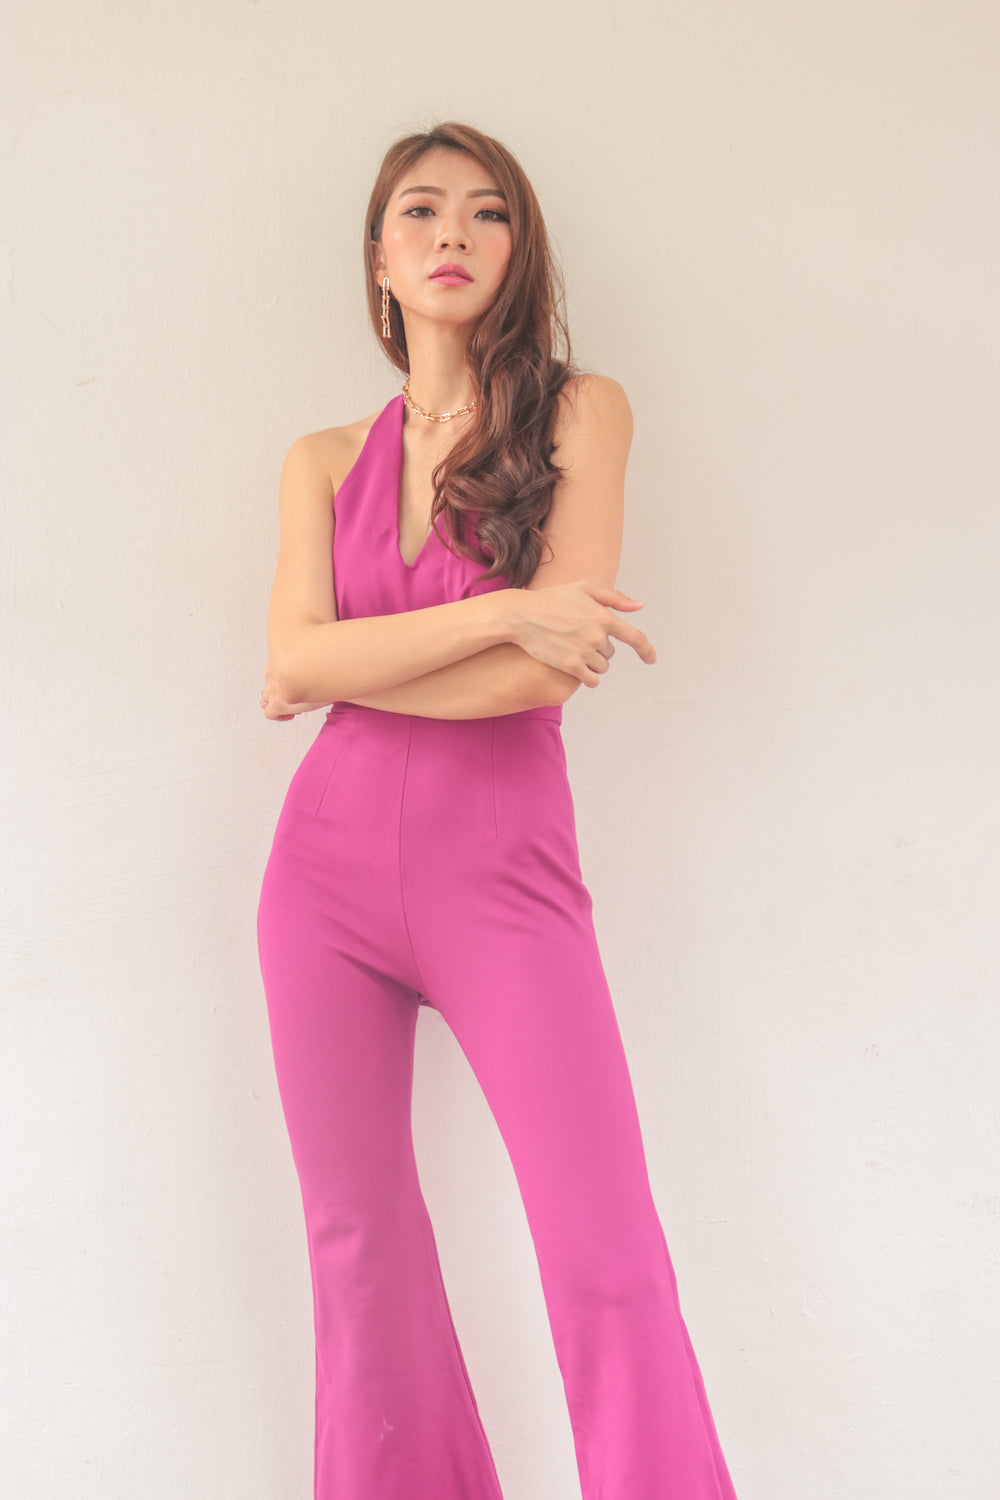 * PREMIUM * - Fiolia Halter Jumpsuit in Magenta - Self Manufactured by LBRLABEL only